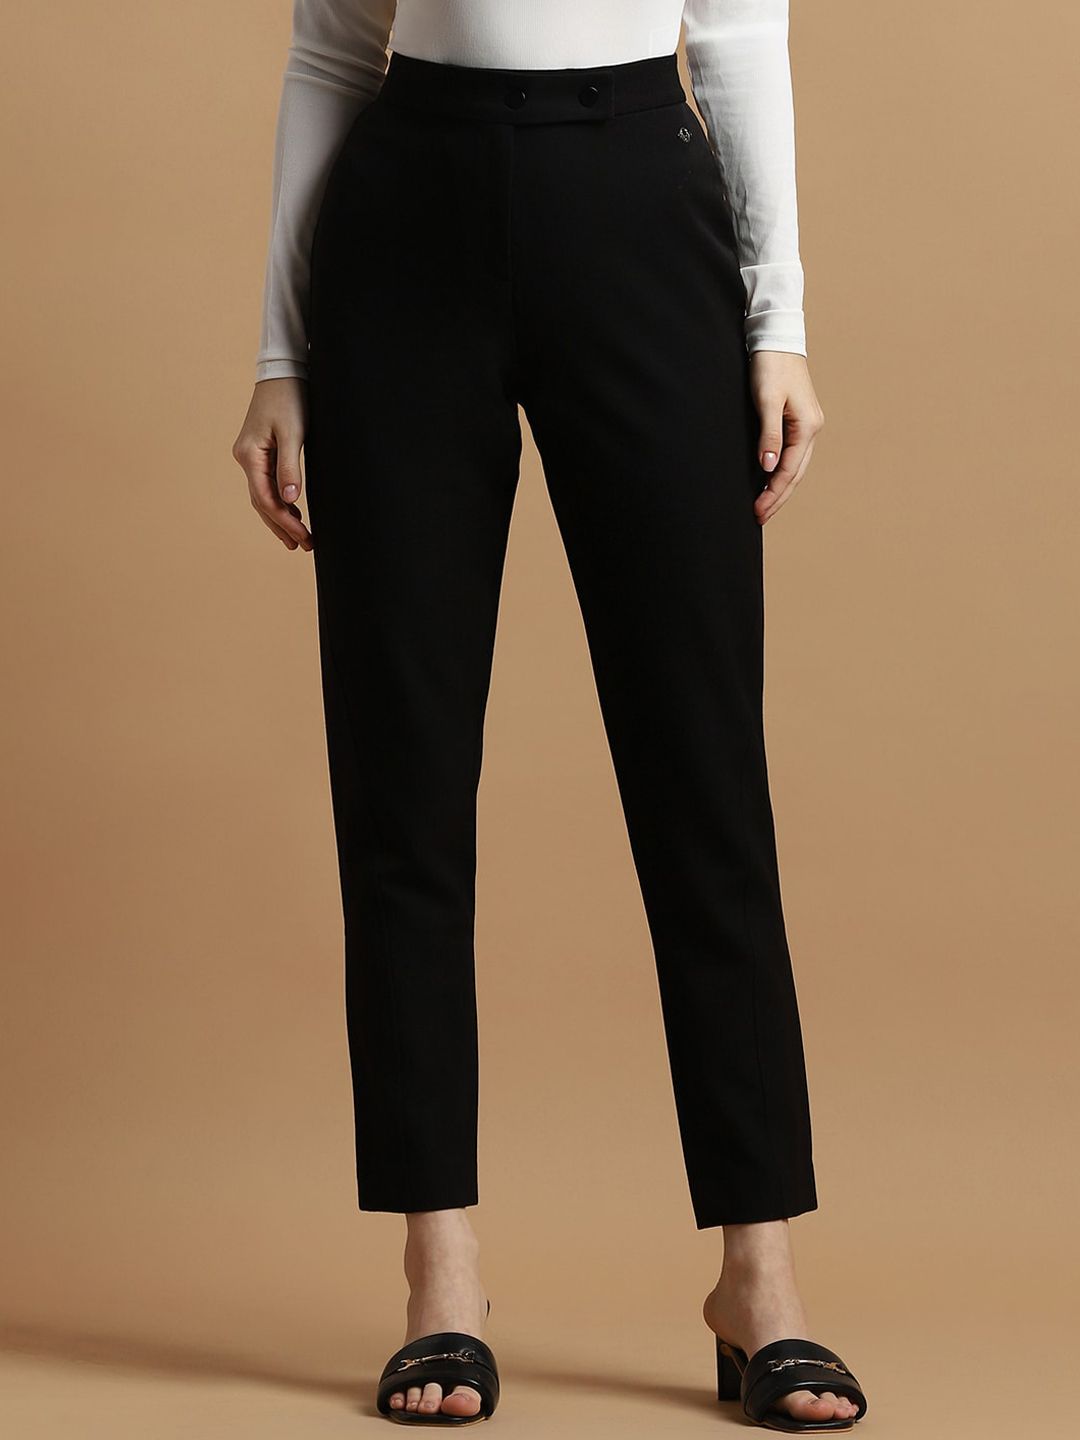 Allen Solly Woman High Rise Plain Formal Trousers Price in India